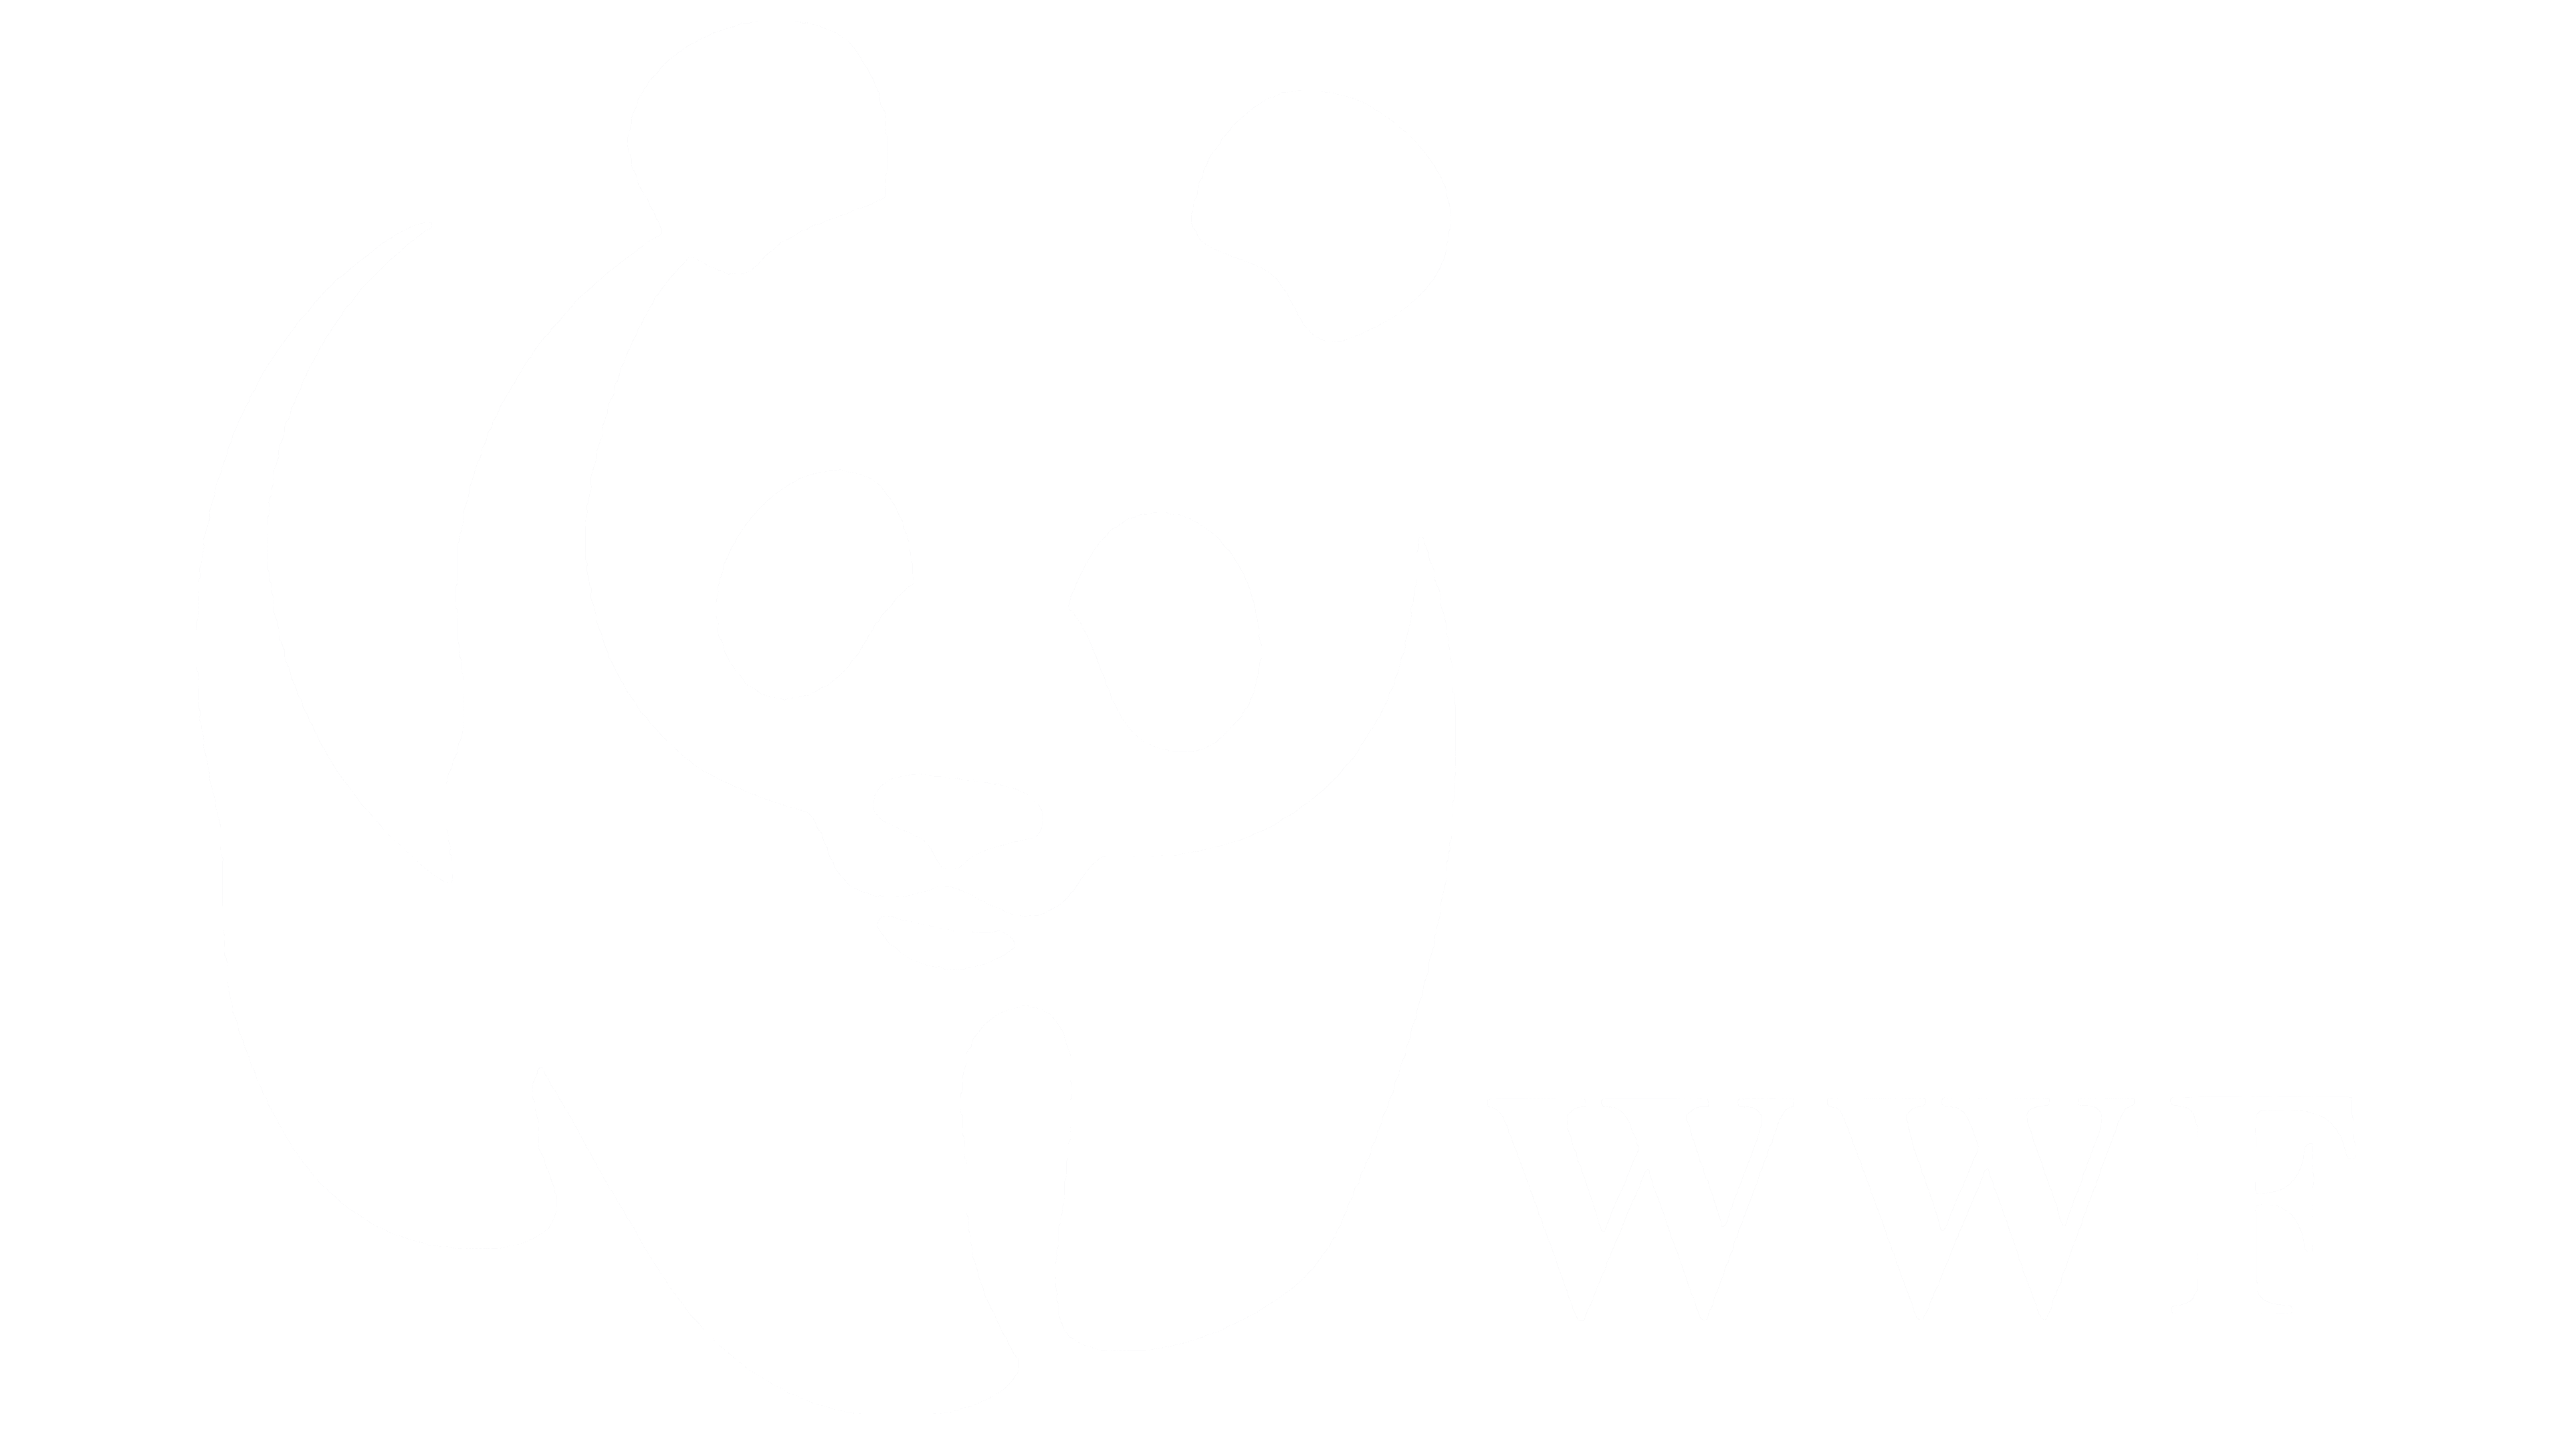 Supporting the WWF organisation